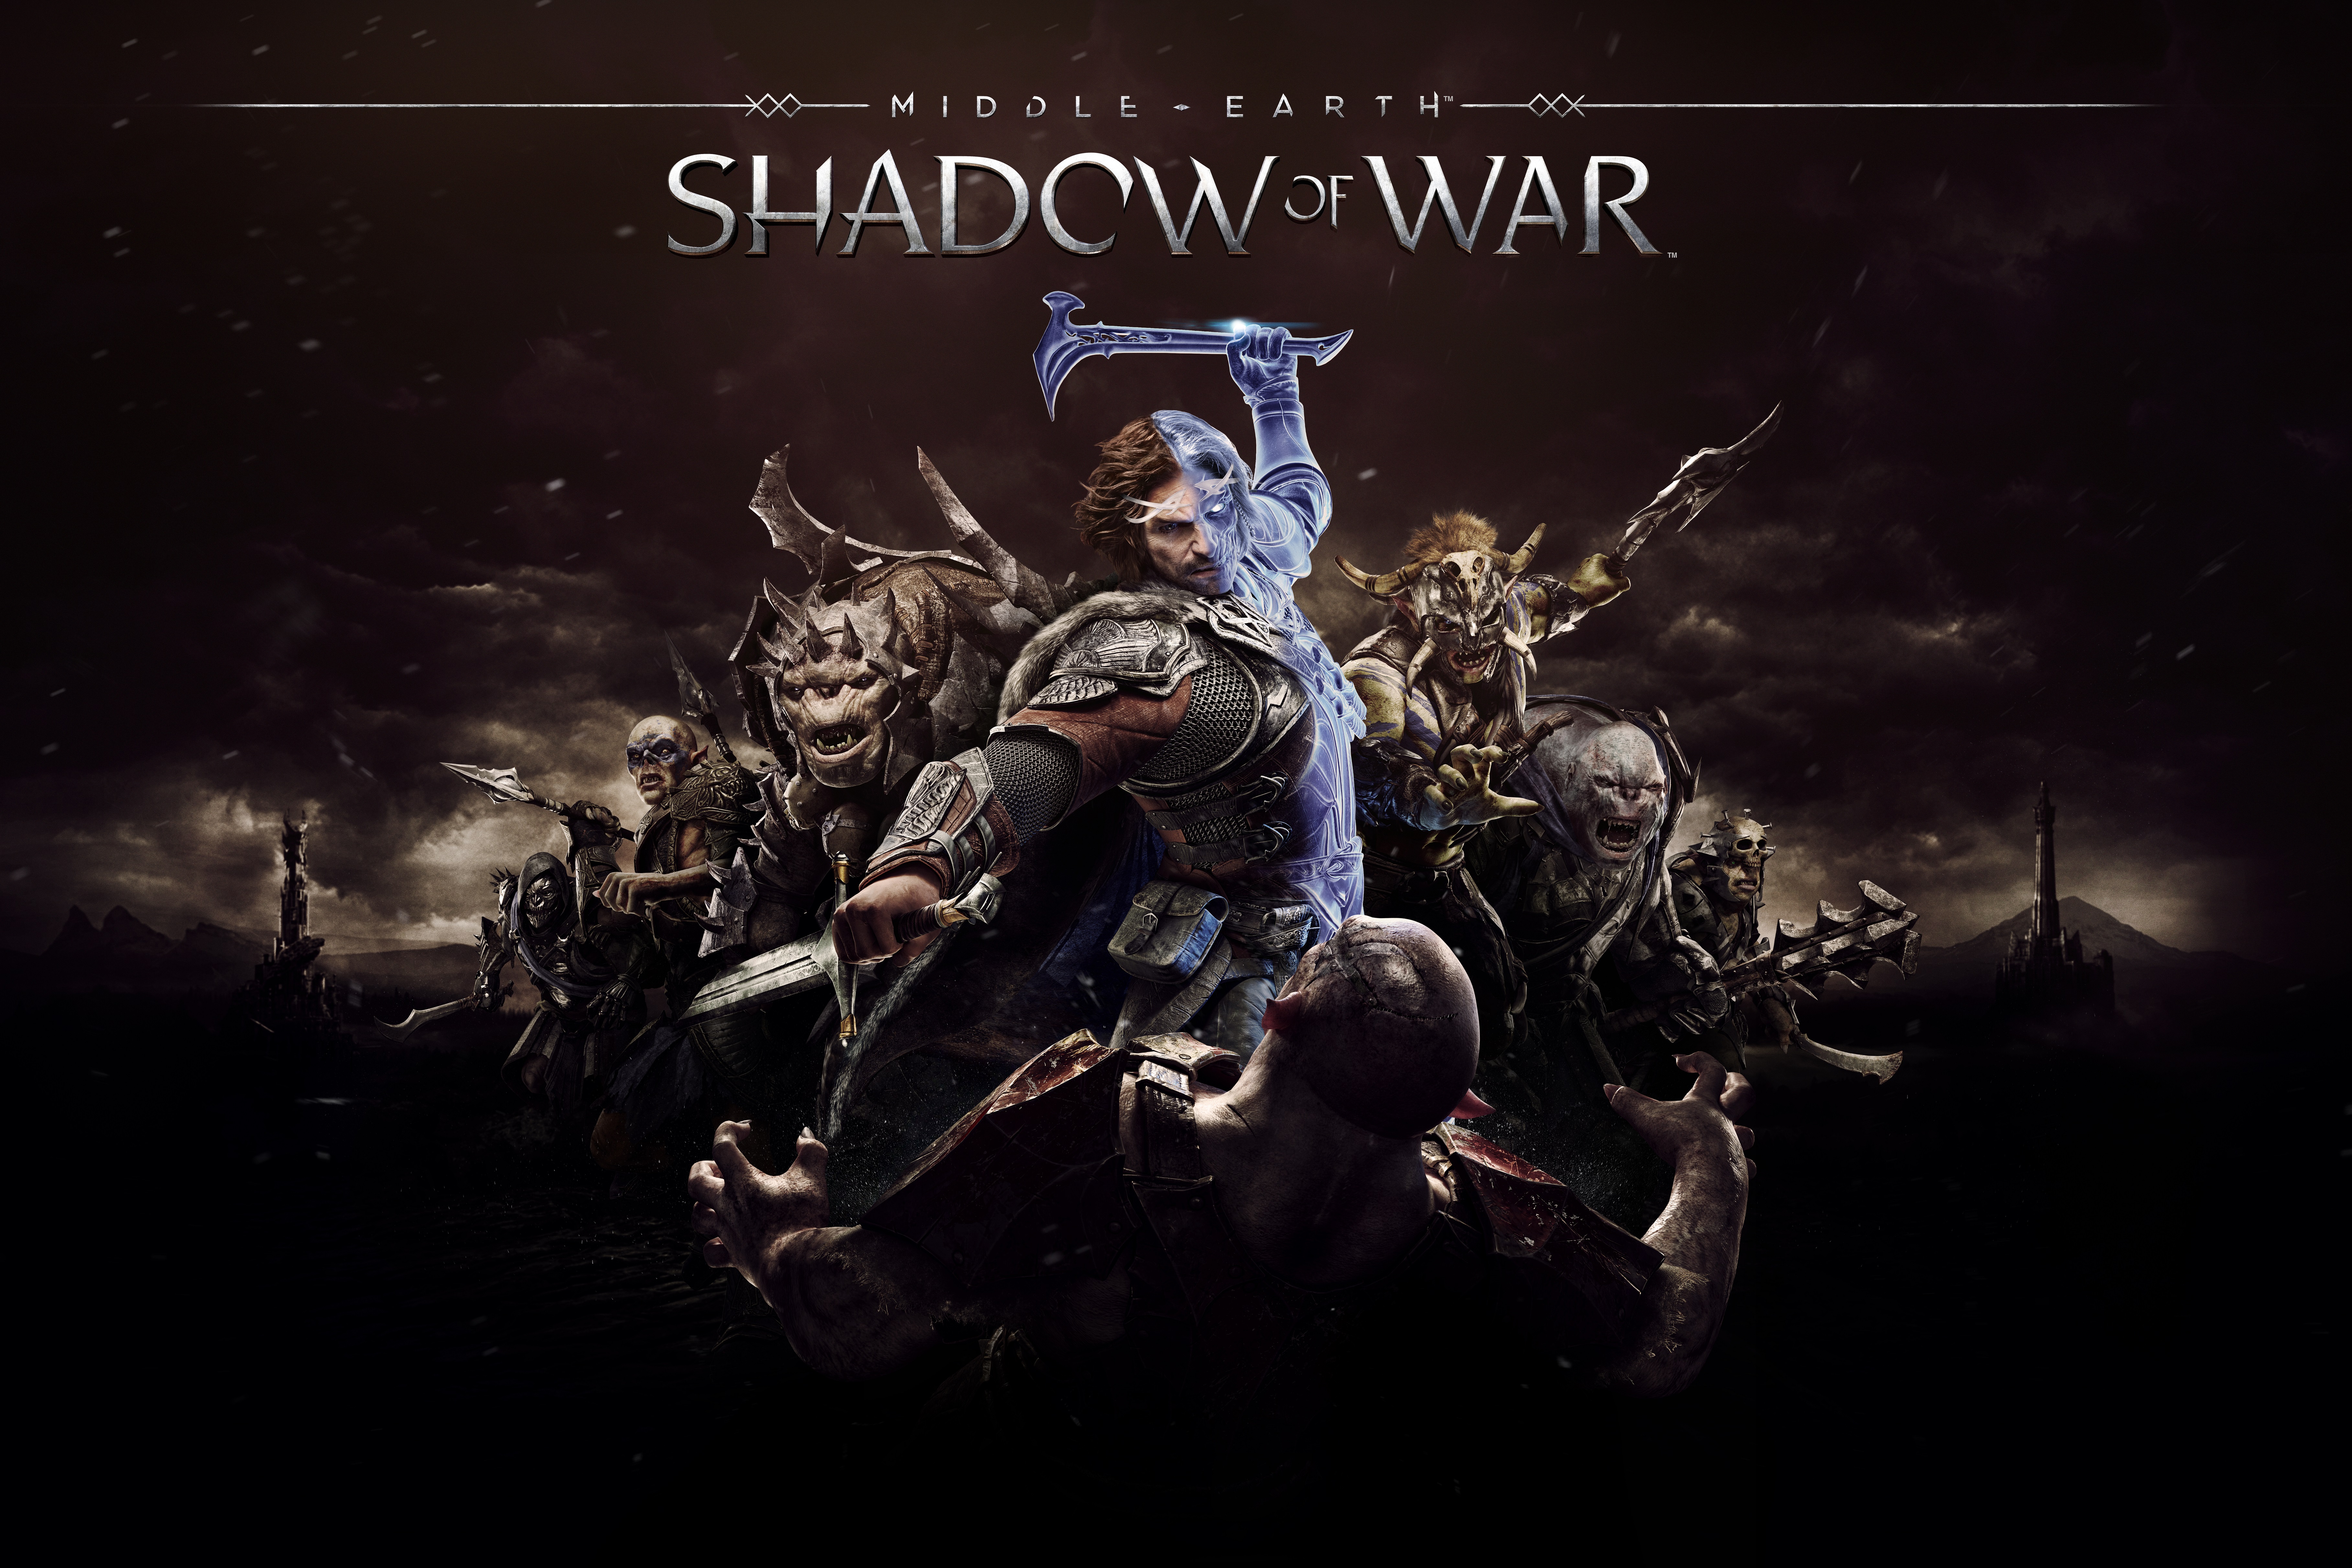 General 7266x4844 video games Middle-Earth: Shadow of War Talion orcs Orc The Lord of the Rings hammer Middle-Earth Celebrimbor